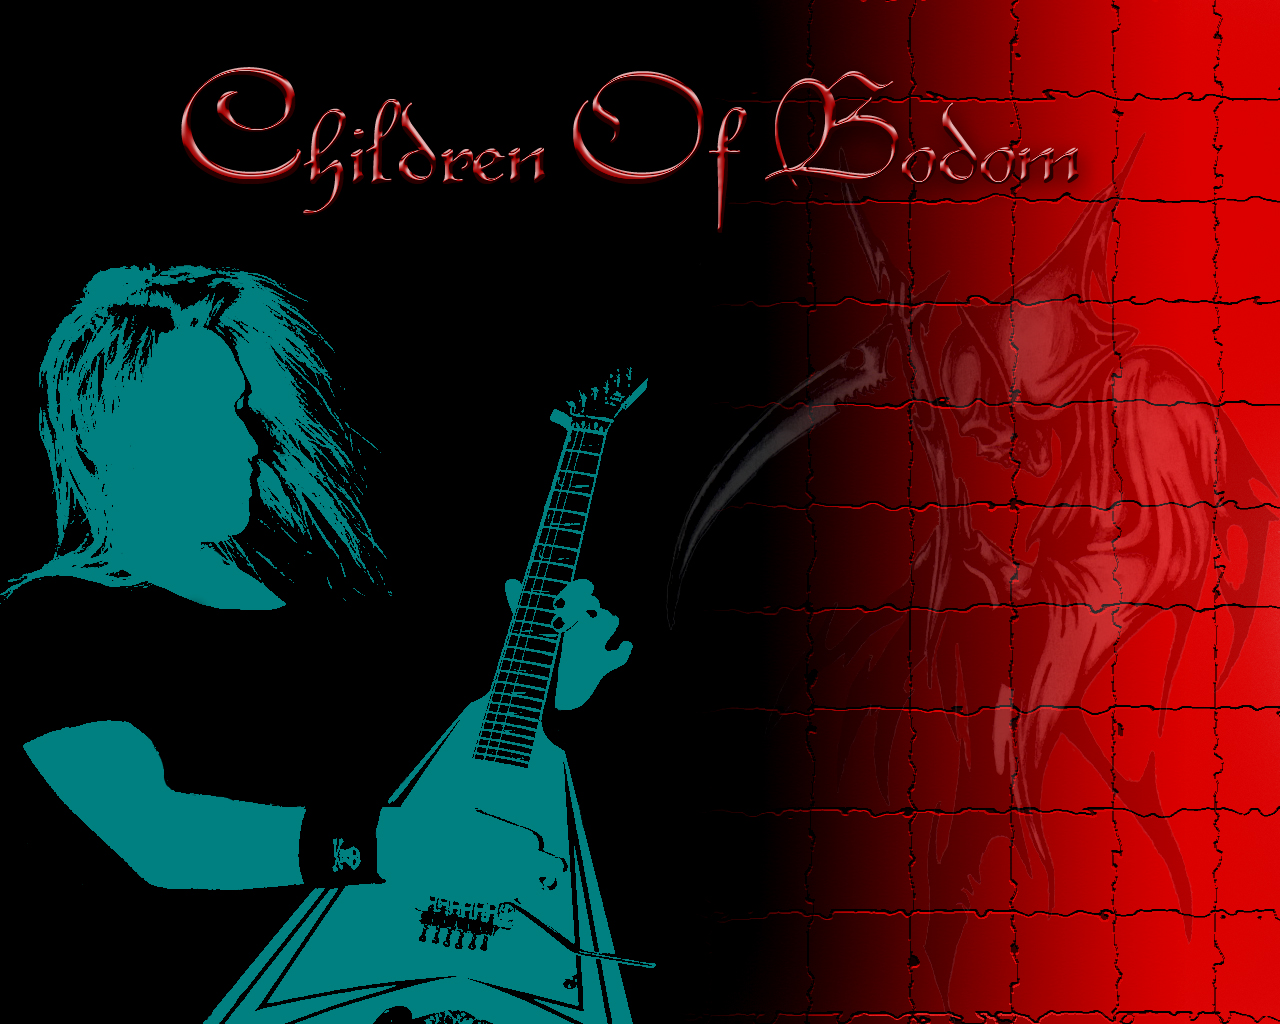 heavy metal, death metal, children of bodom, thrash metal, music cell phone wallpapers